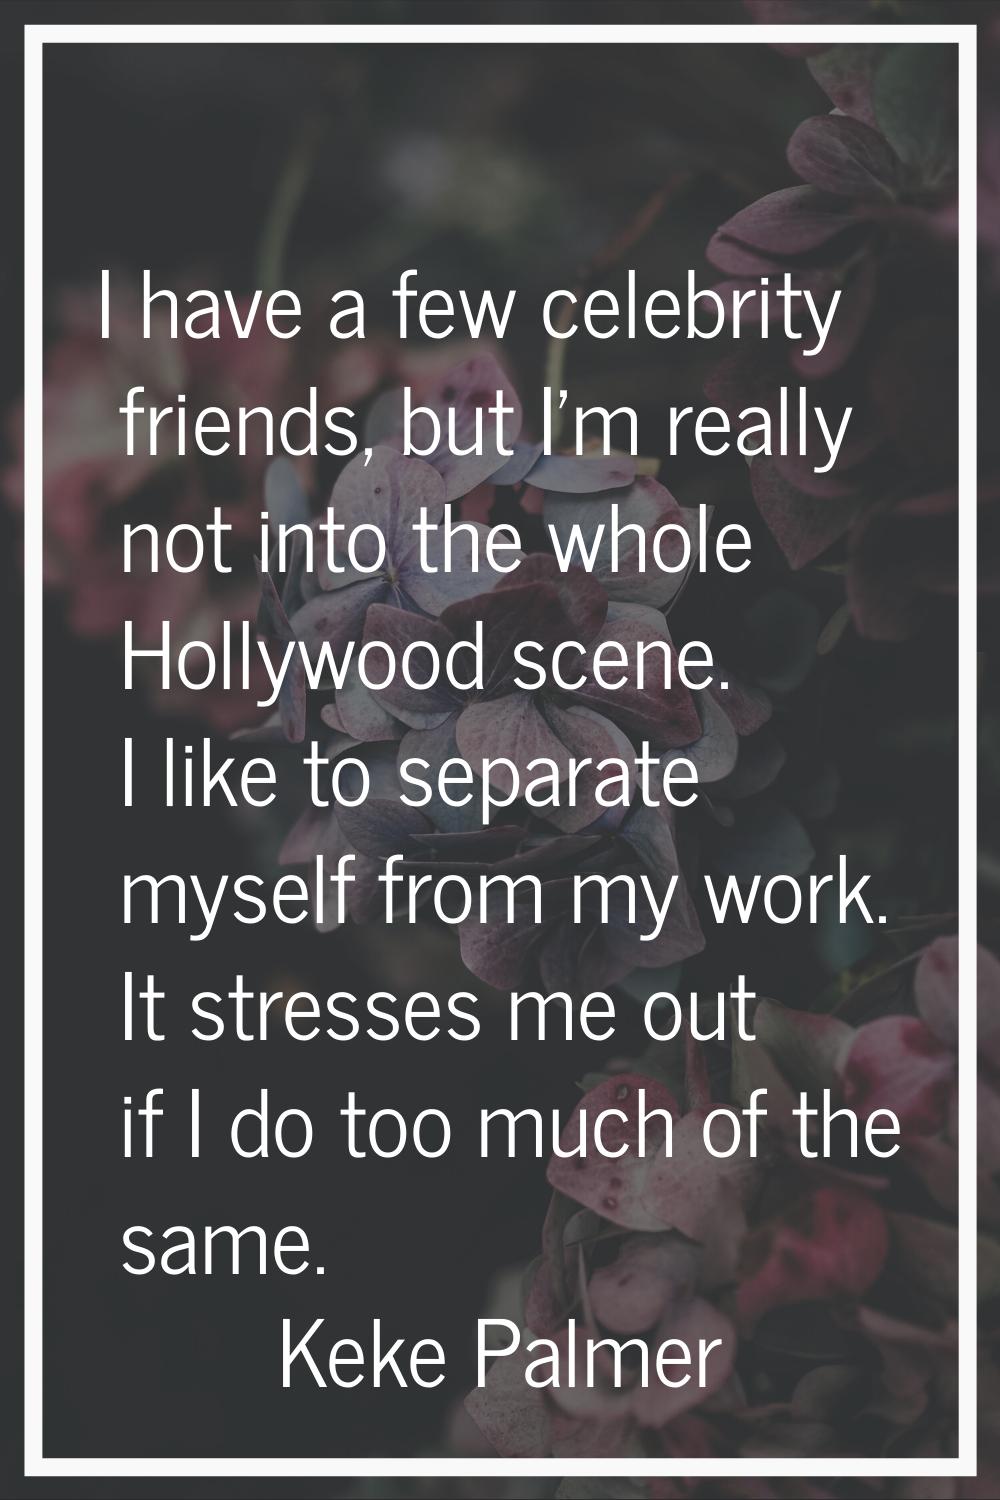 I have a few celebrity friends, but I'm really not into the whole Hollywood scene. I like to separa